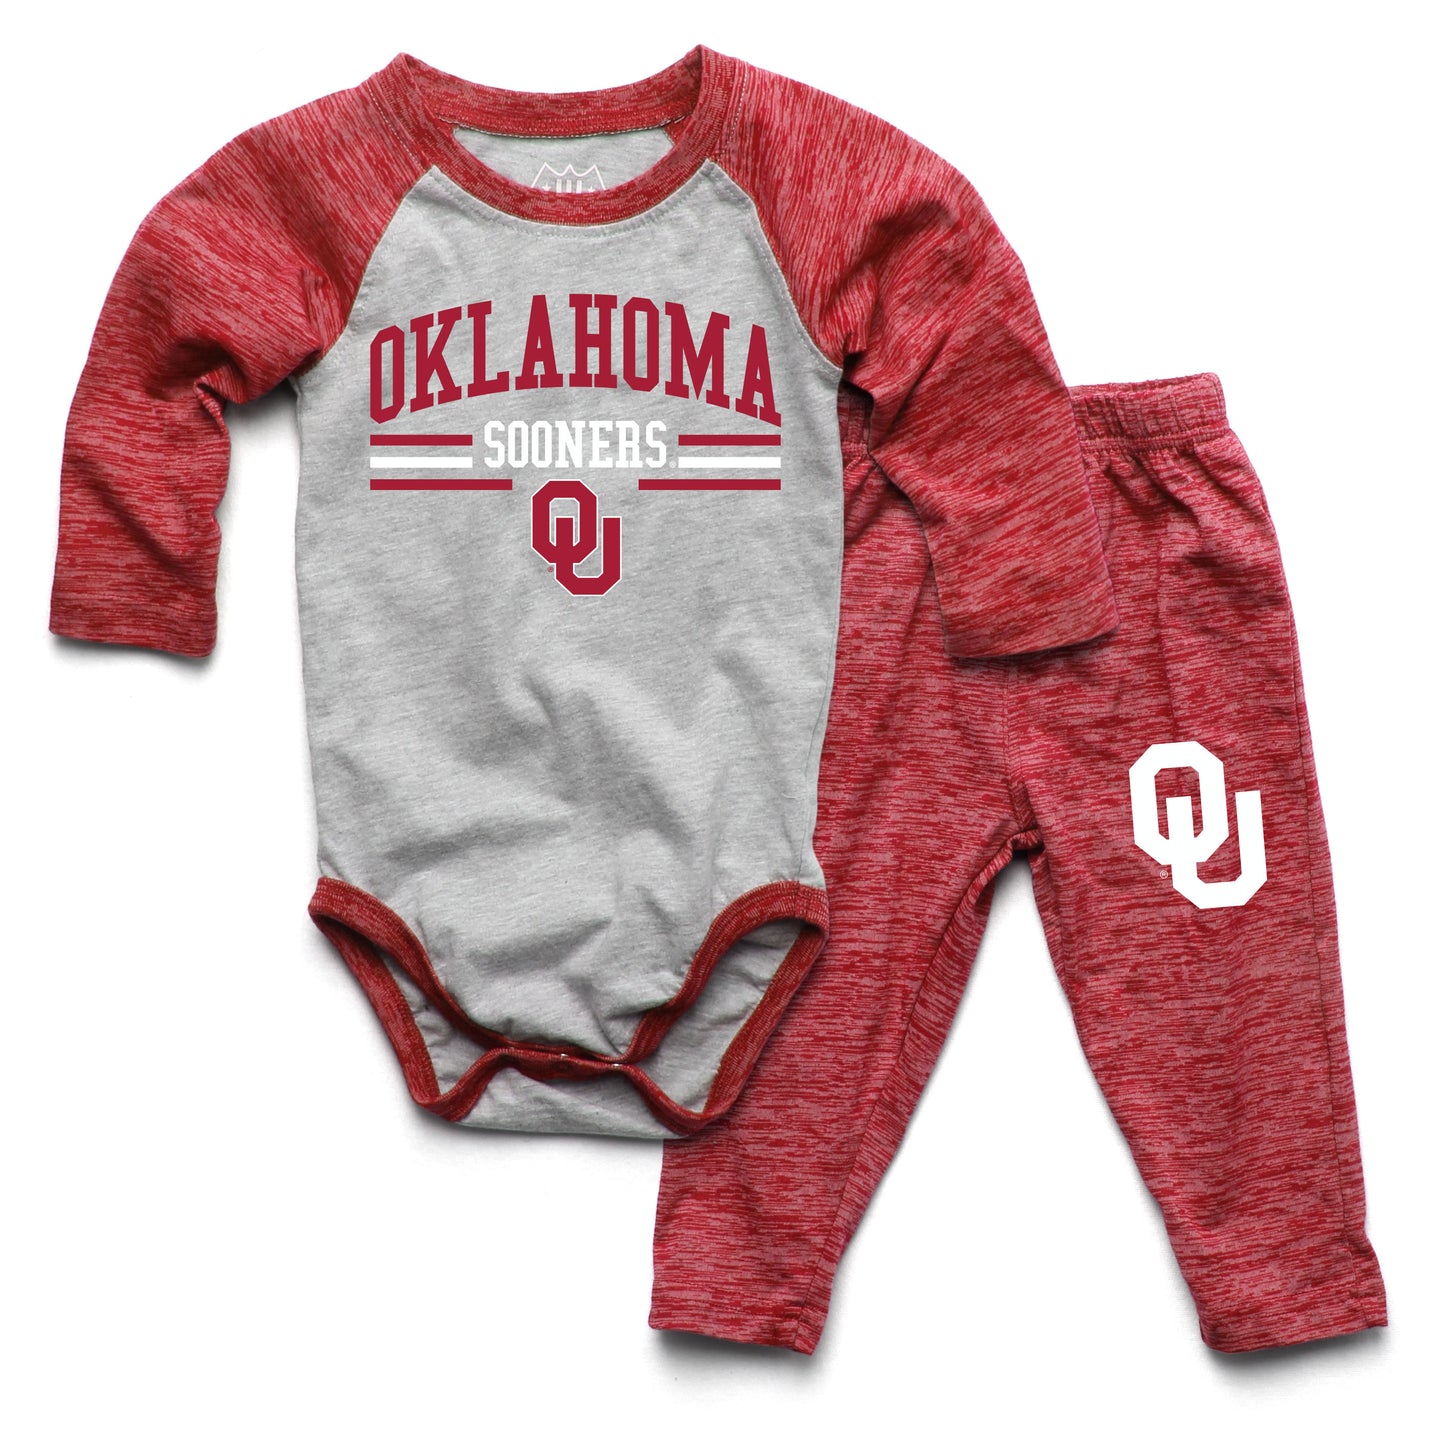 Oklahoma Sooners Wes and Willy Baby College Team Hopper and Pant Set